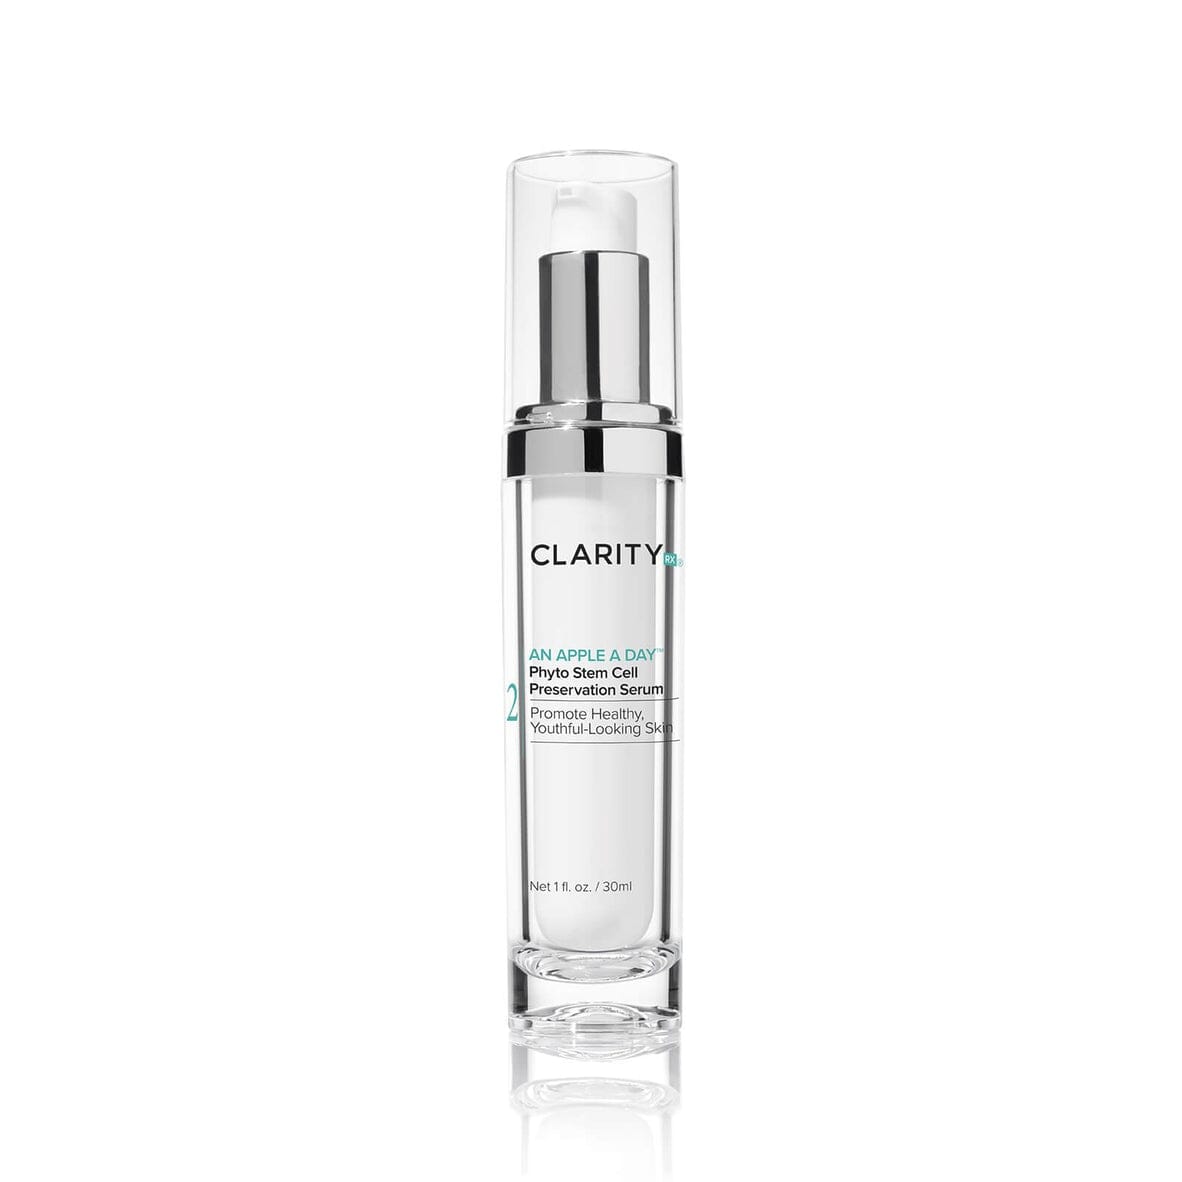 ClarityRx An Apple a Day ClarityRx 1.0 fl. oz. Shop at Exclusive Beauty Club